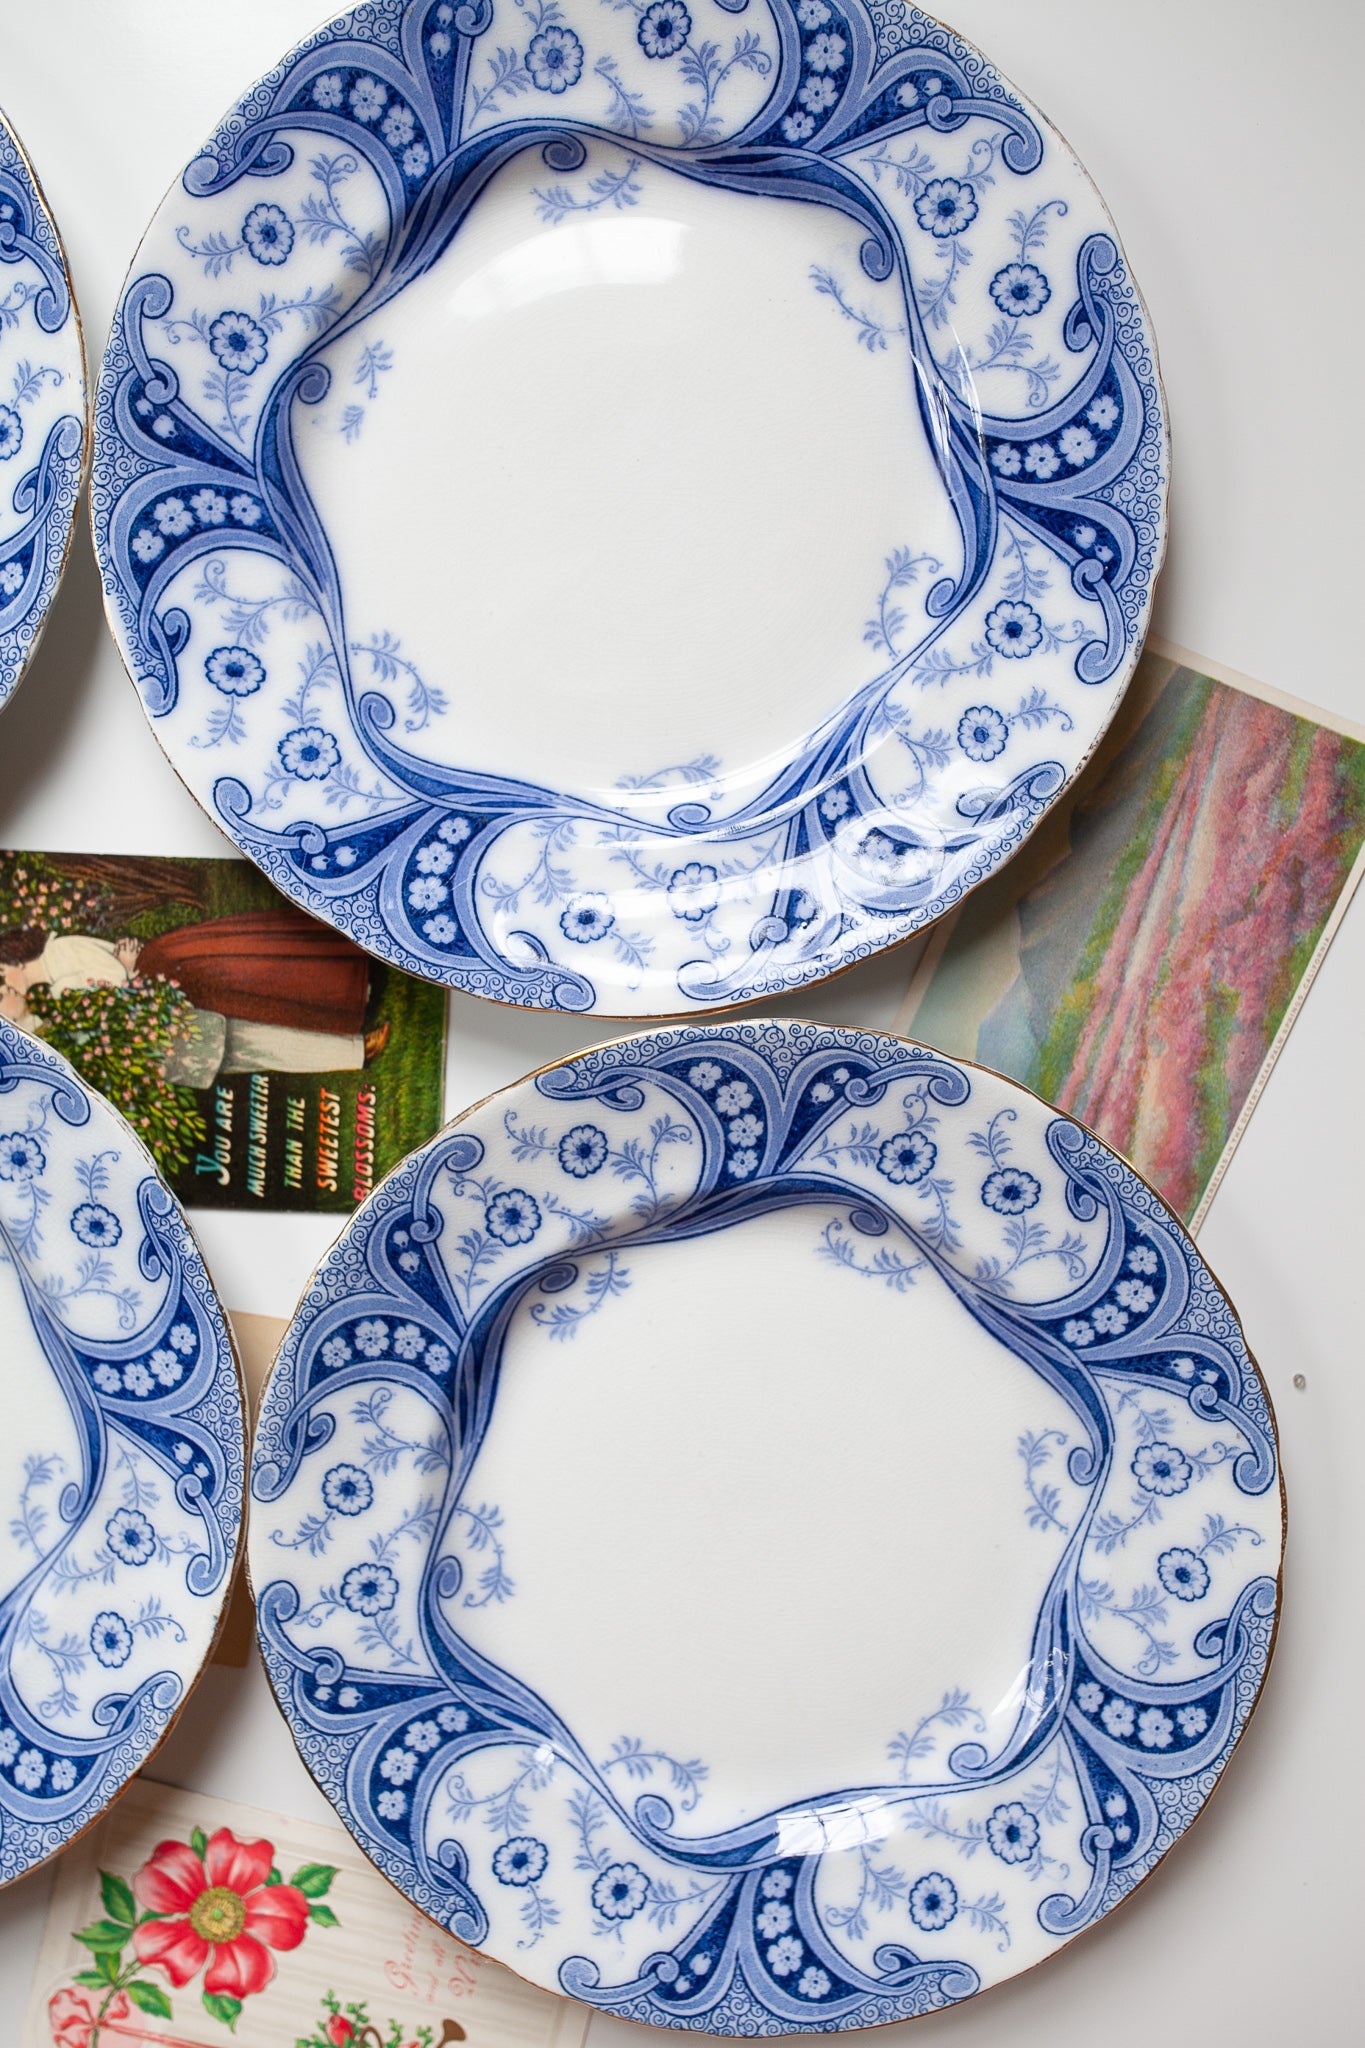 Antique Plates Set of 4 Blue and White